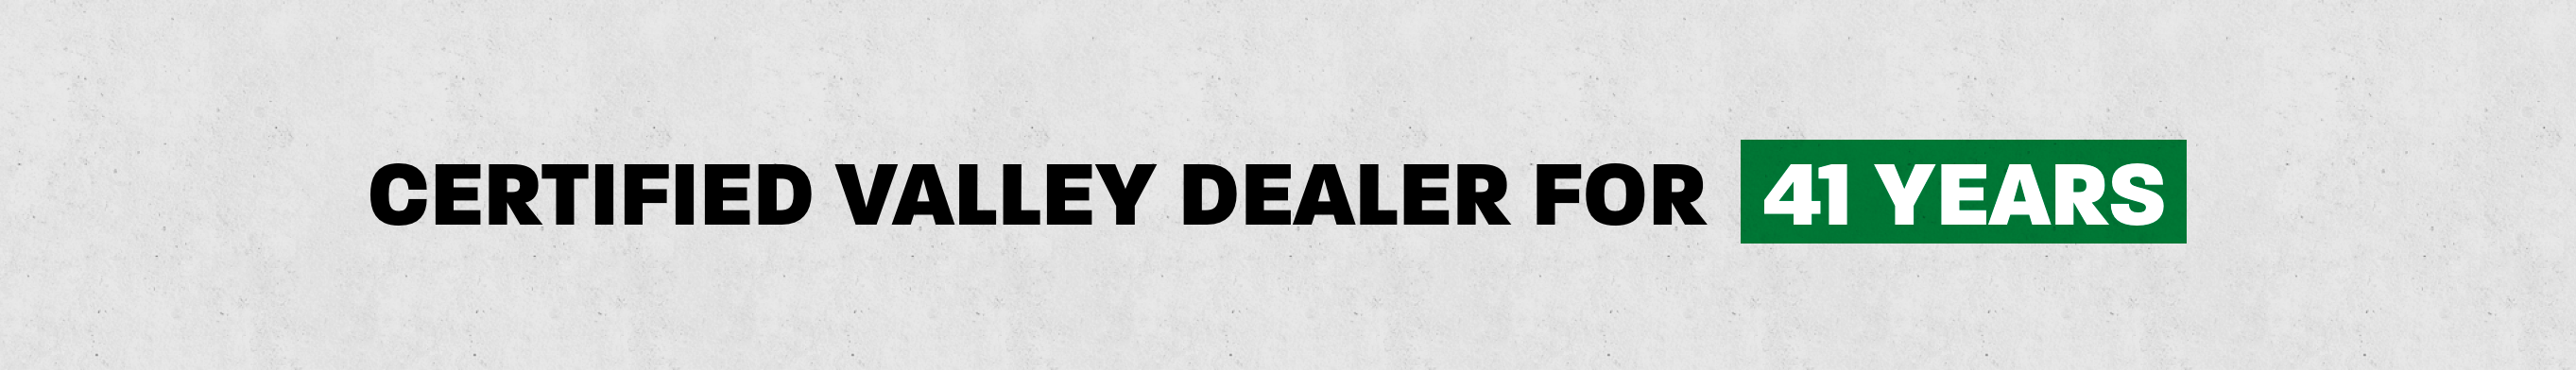 Certified Valley Dealer for 41 Years